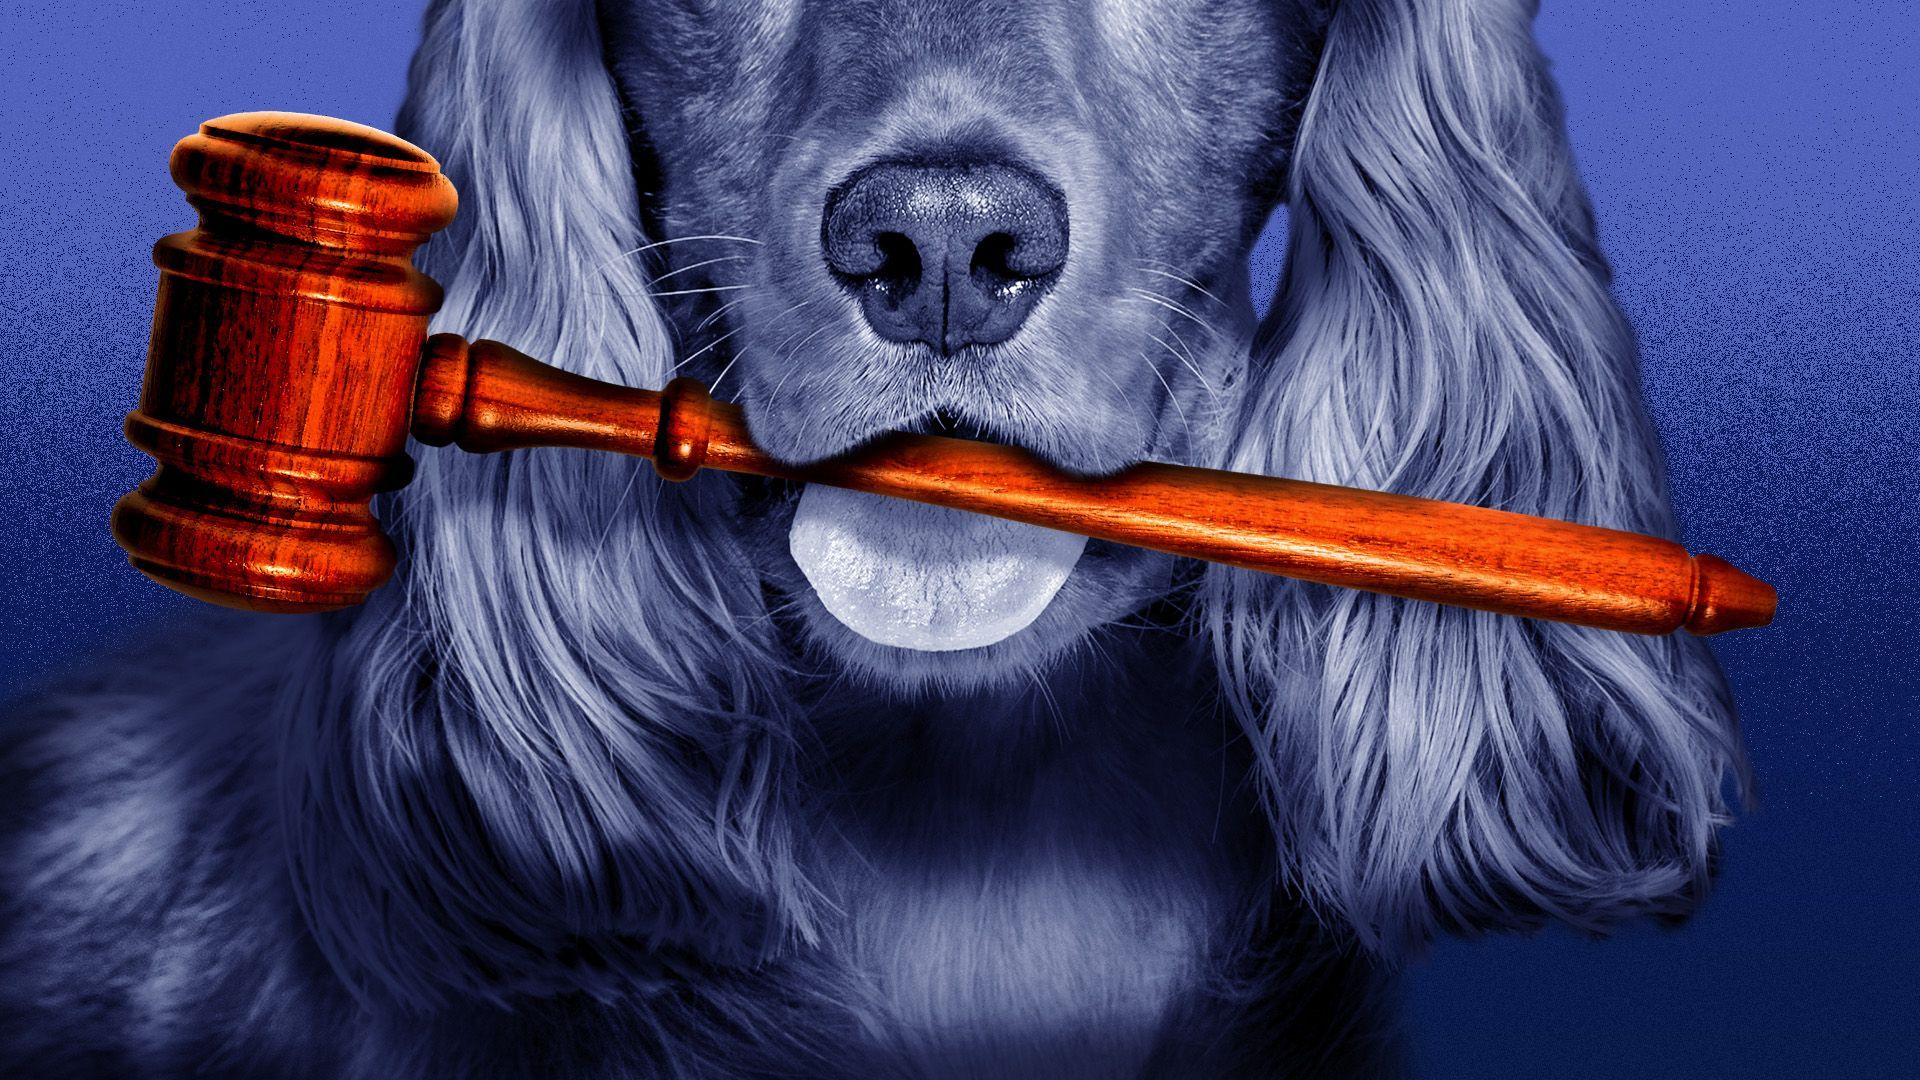 Illustration of a dog holding a gavel in it's mouth like a stick